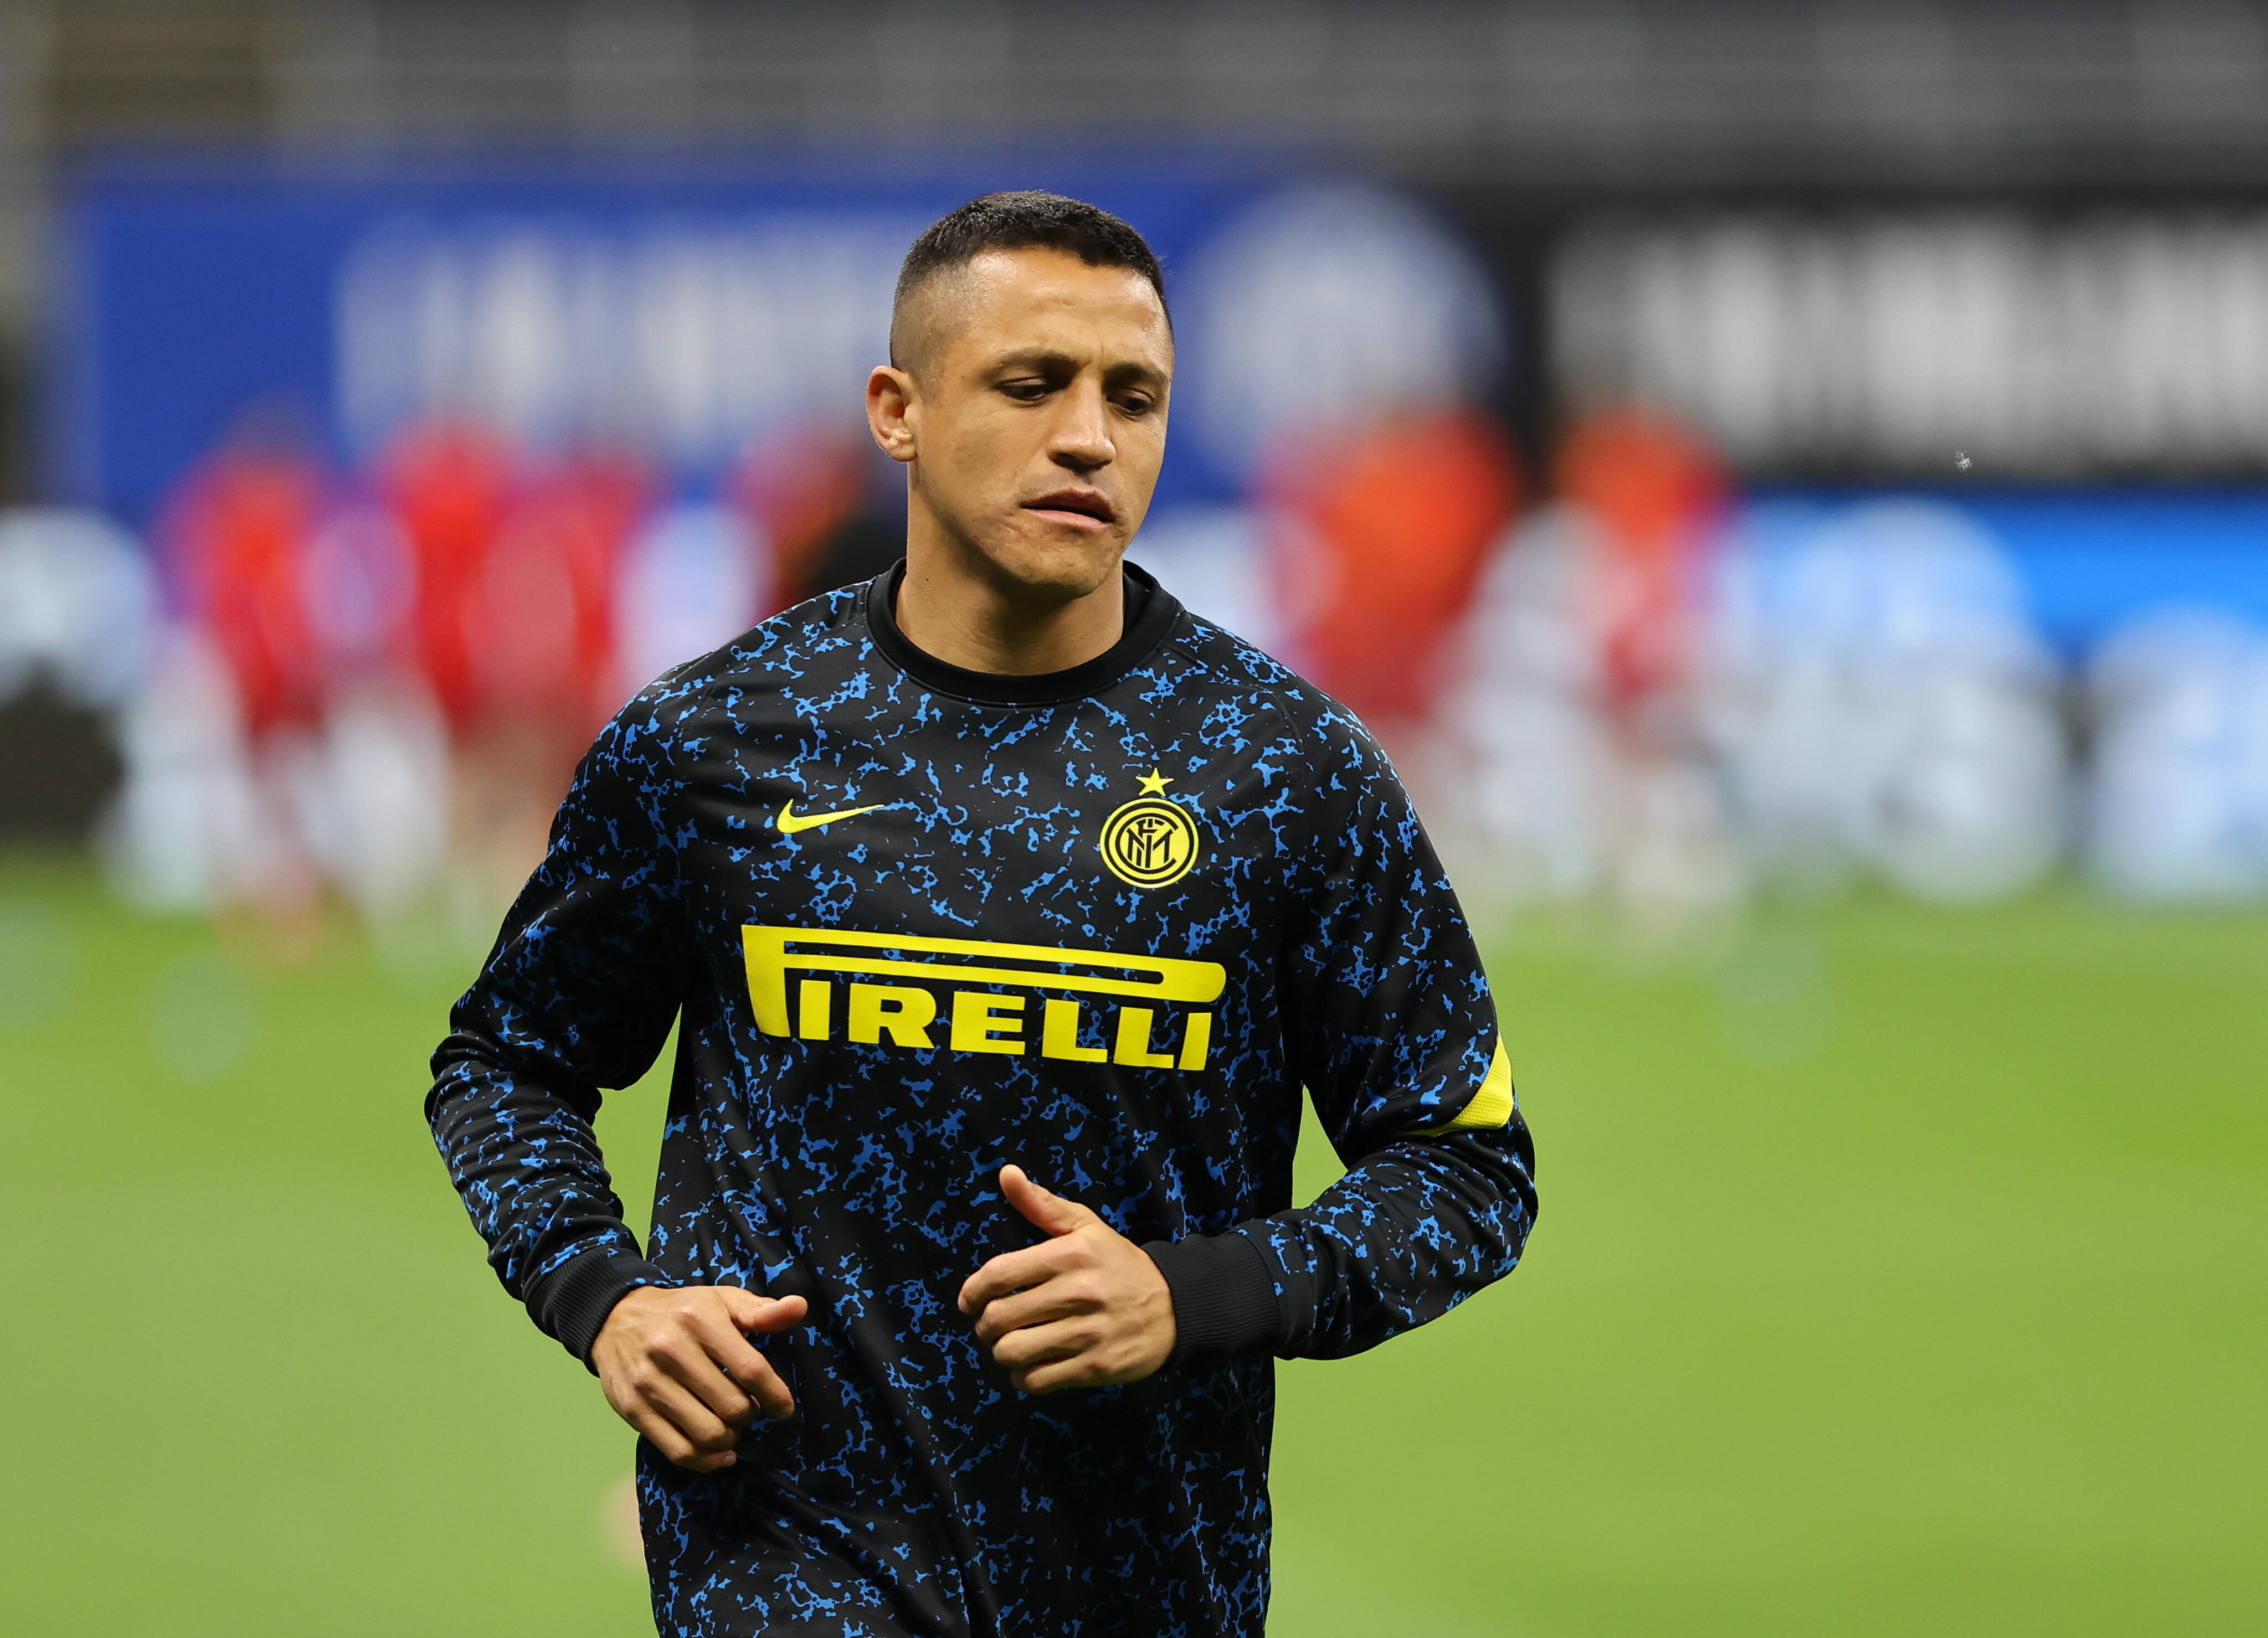 June 1, 2021, Milan, Italy: Alexis Sanchez Of Fc Internazionale During The Serie A 2020/21 Season Of Fc Internazionale A